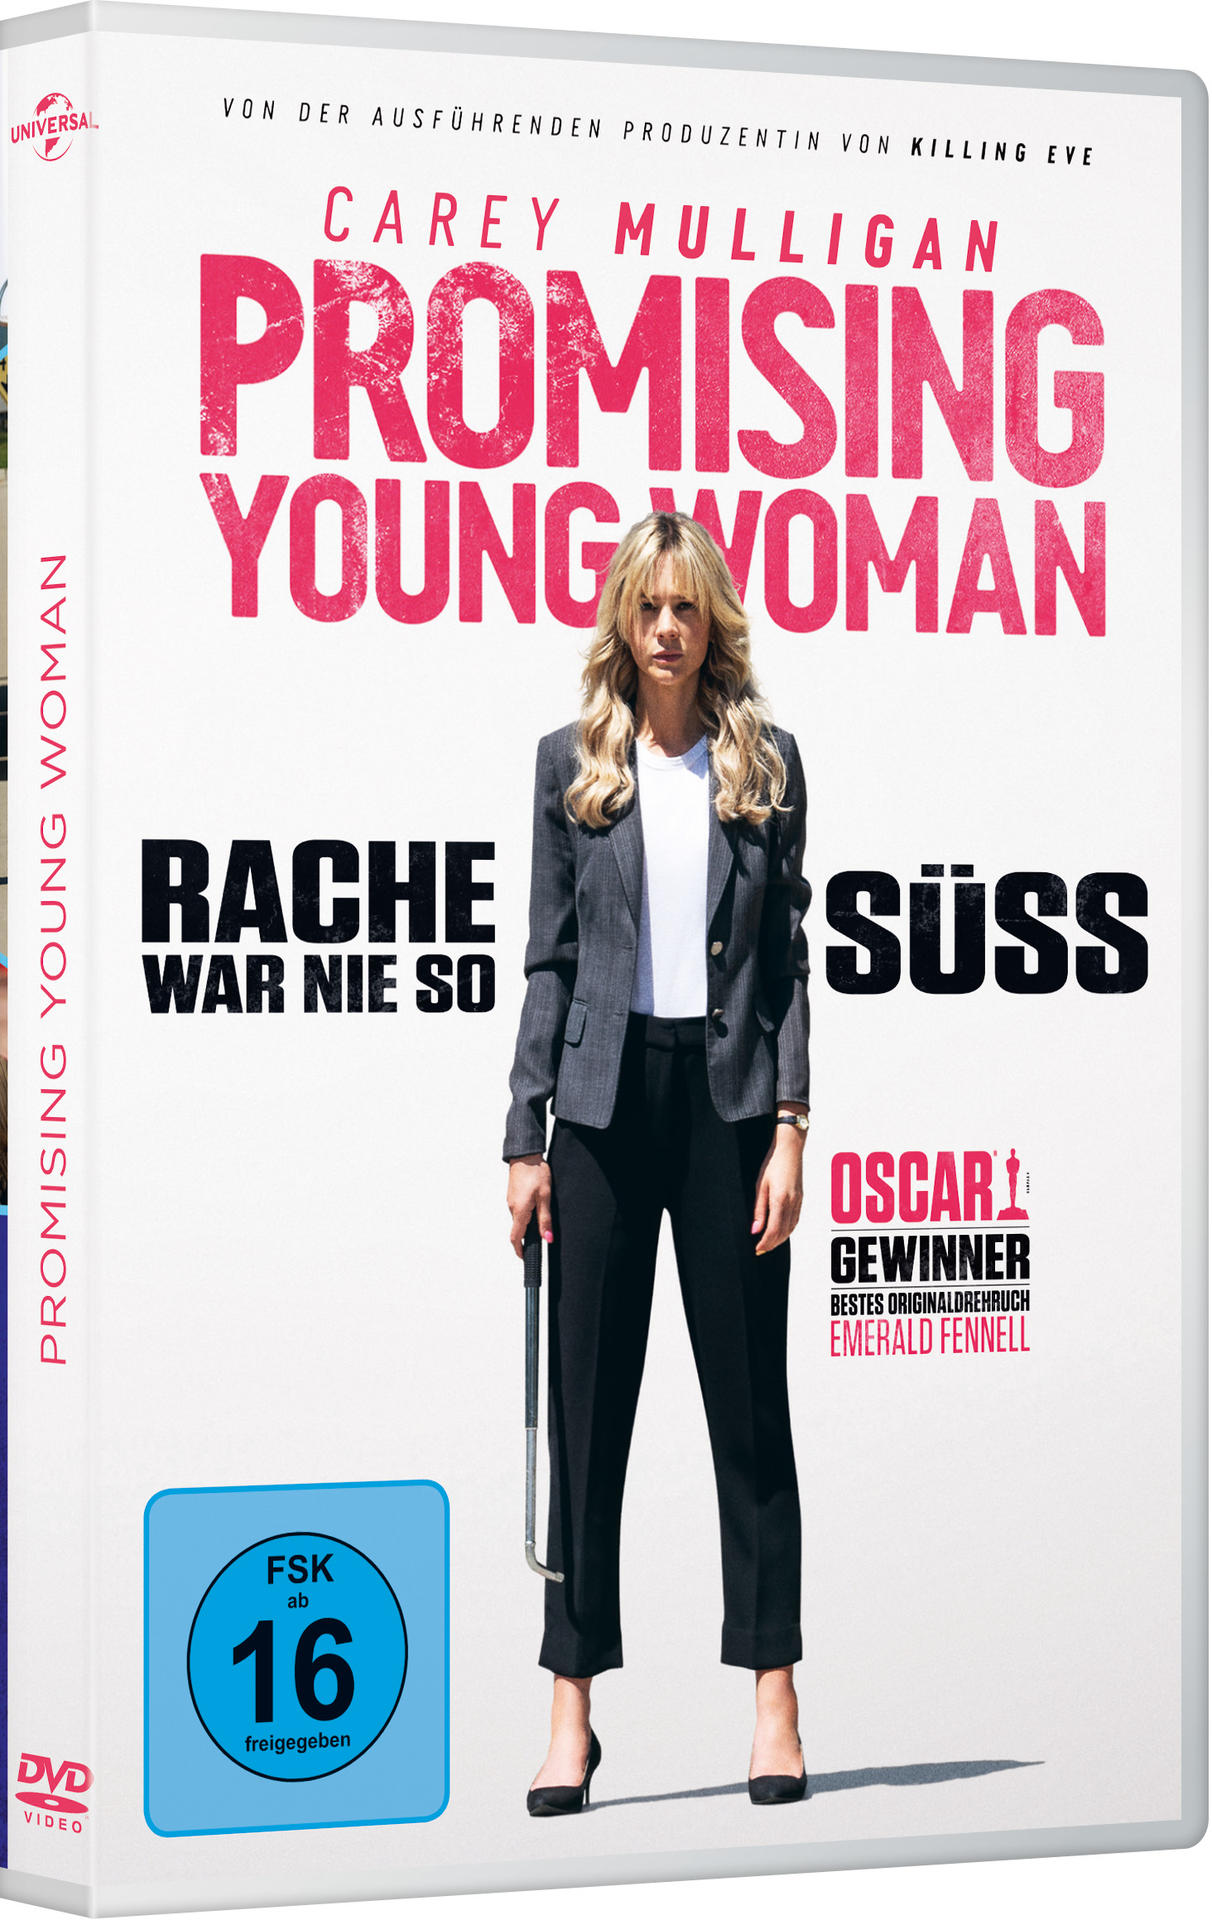 Promising Young DVD Woman